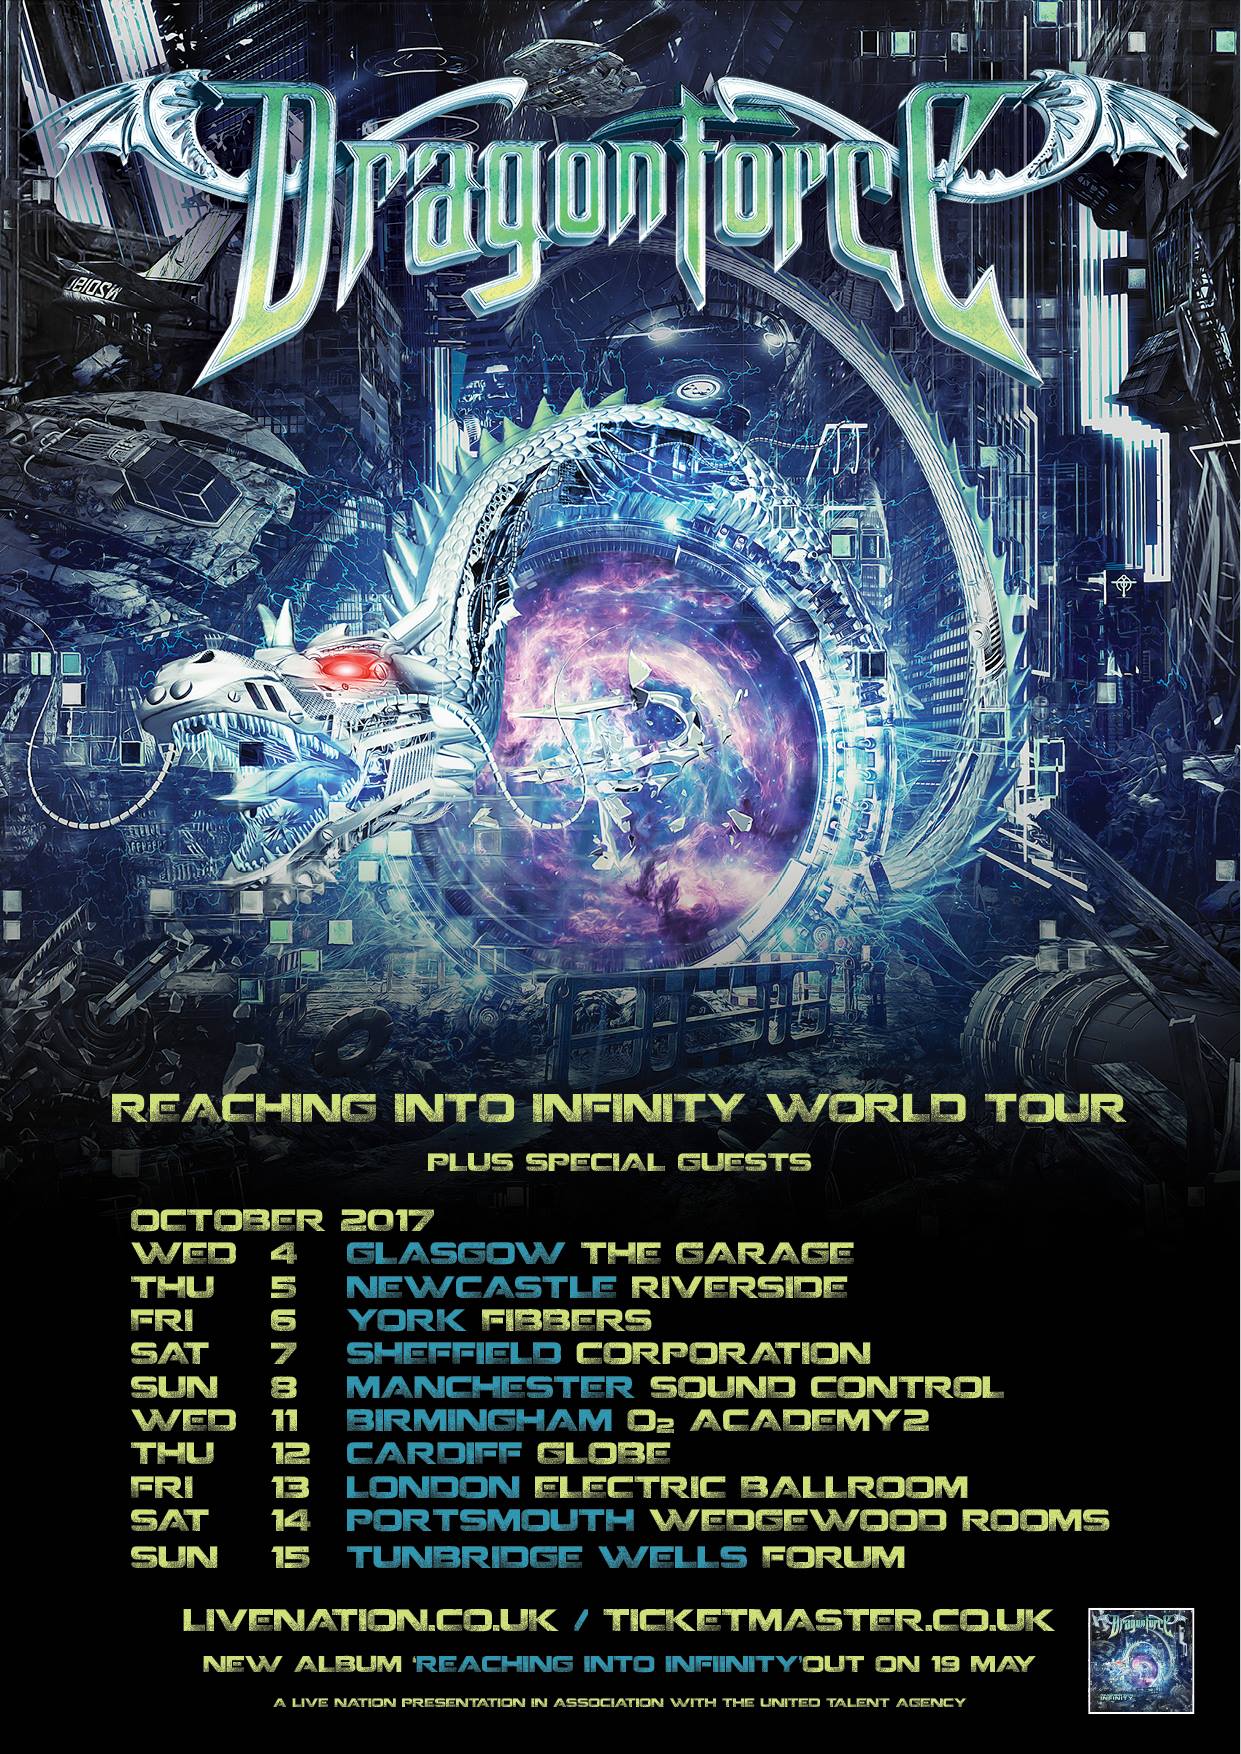 UK LEG OF REACHING INTO INFINITY WORLD TOUR ANNOUNCED DragonForce